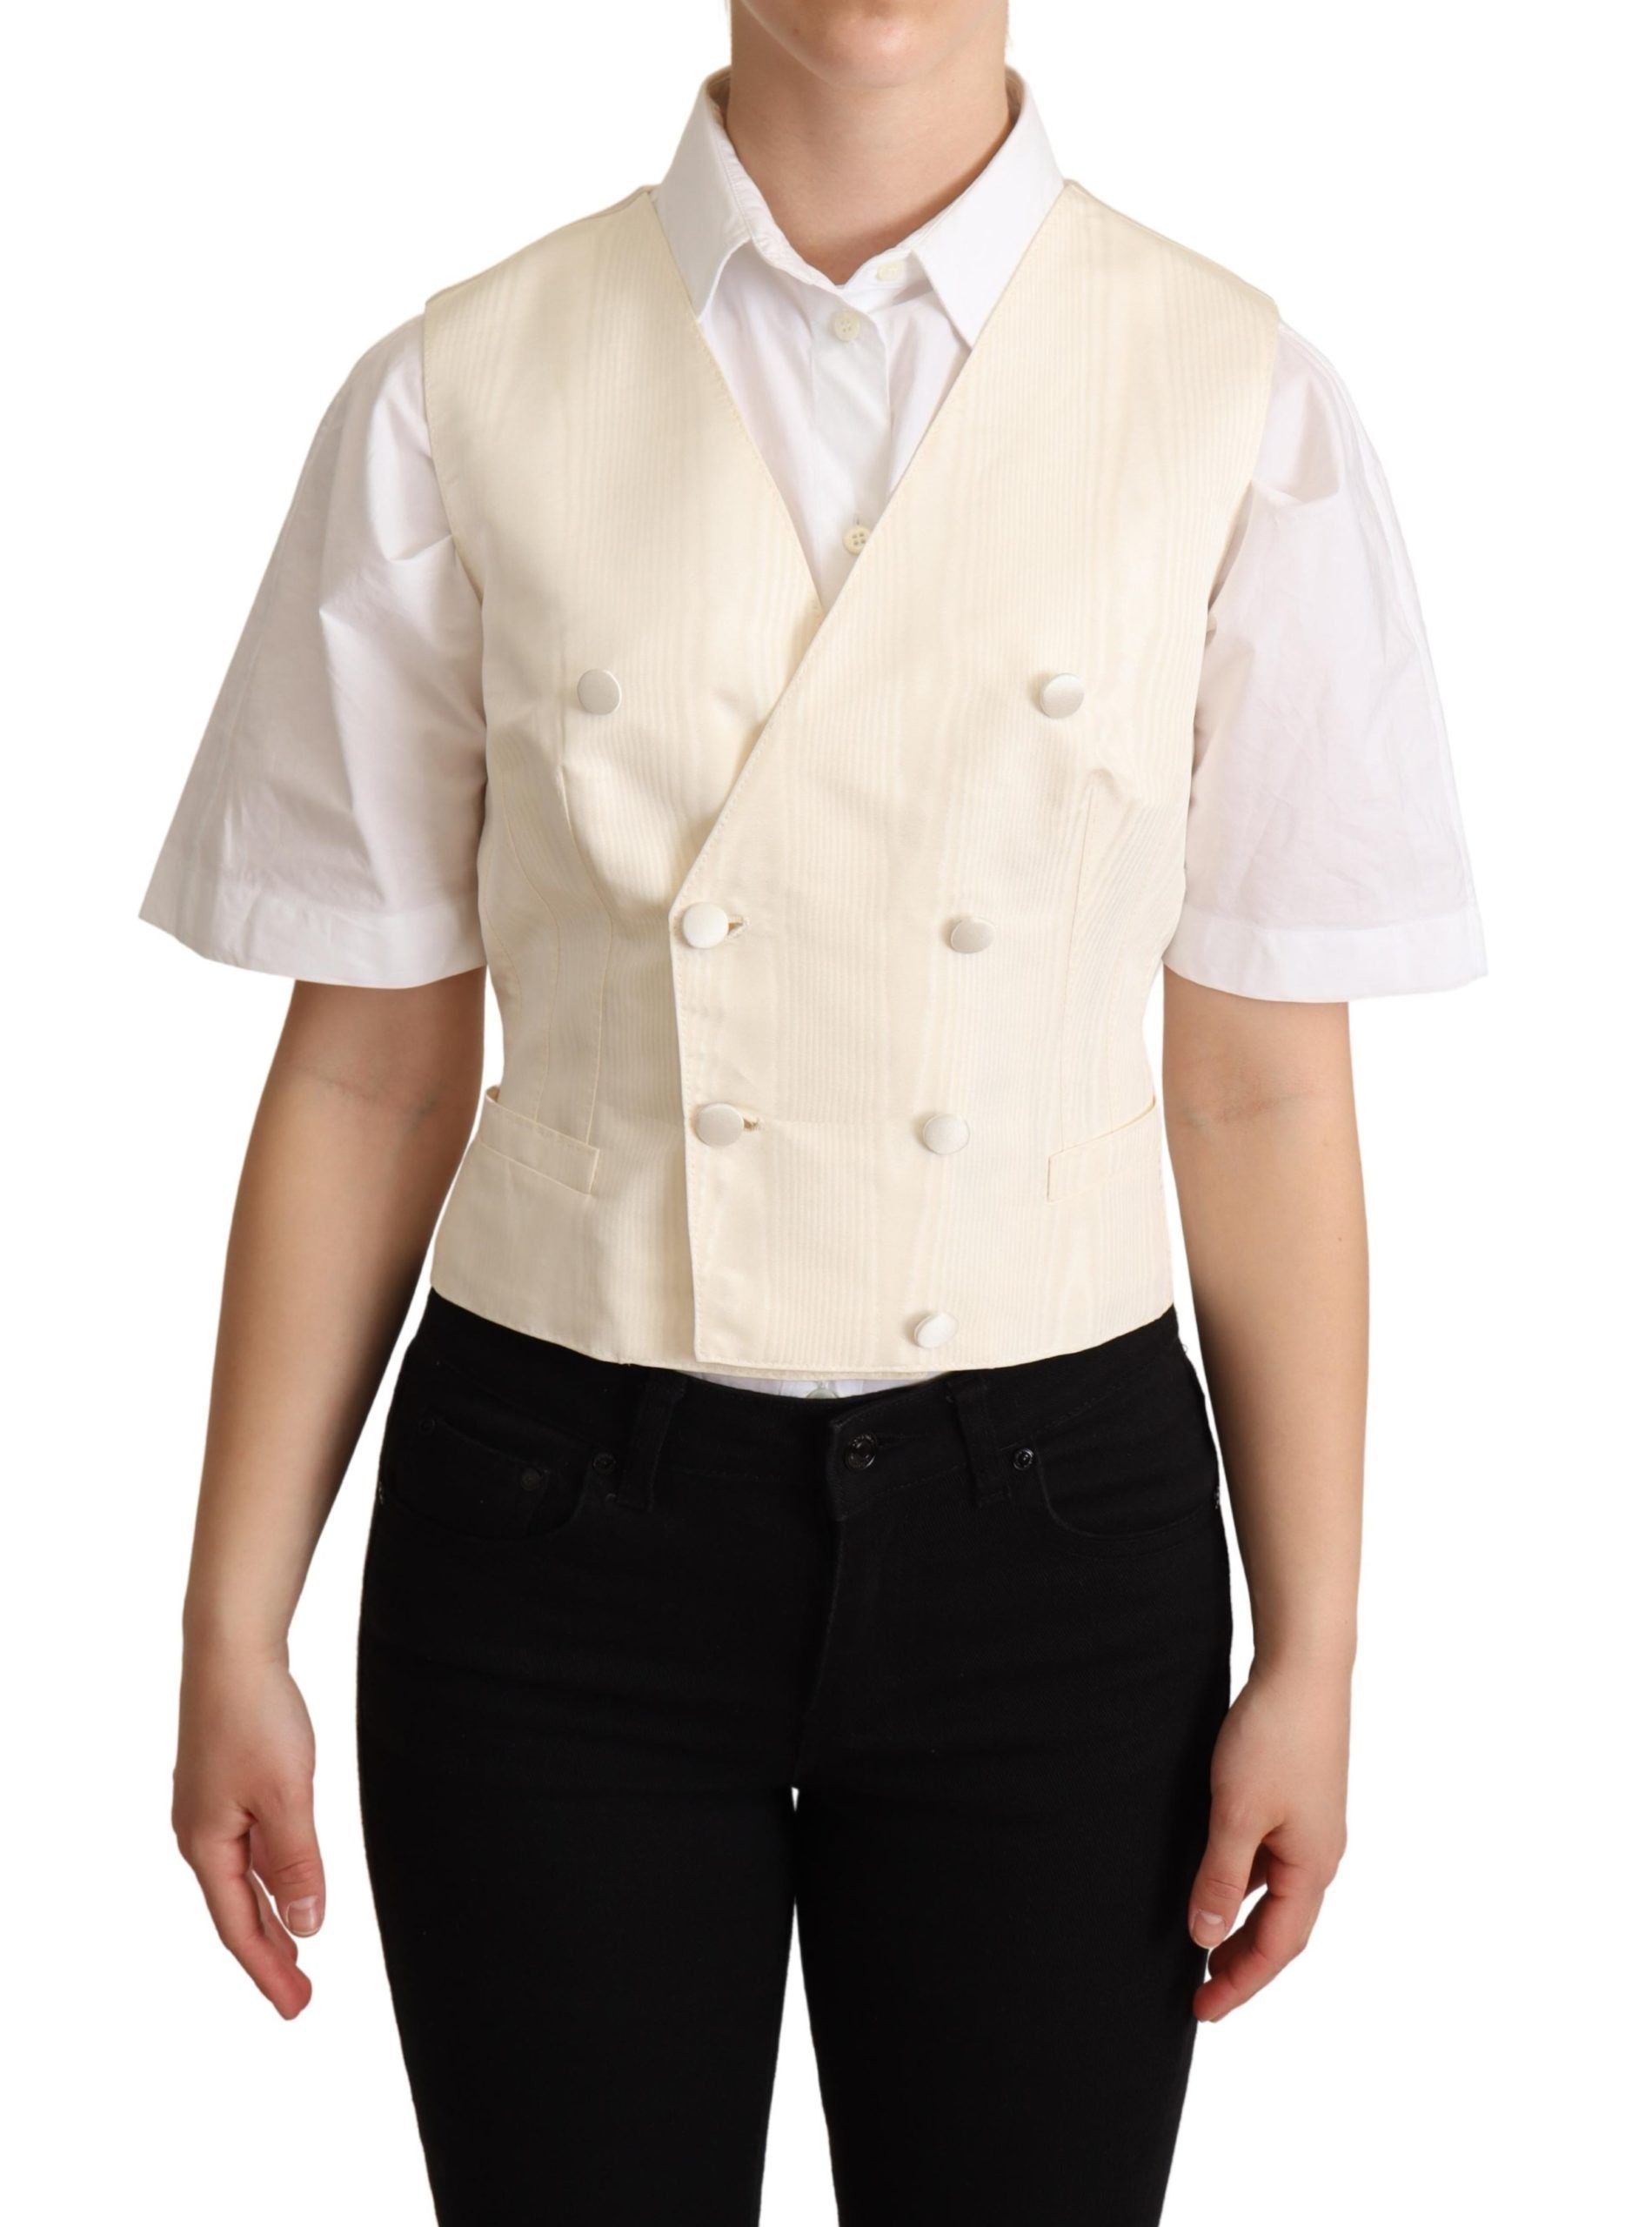 Dolce & Gabbana Beige Silk Sleeveless Waistcoat Vest - Designed by Dolce & Gabbana Available to Buy at a Discounted Price on Moon Behind The Hill Online Designer Discount Store